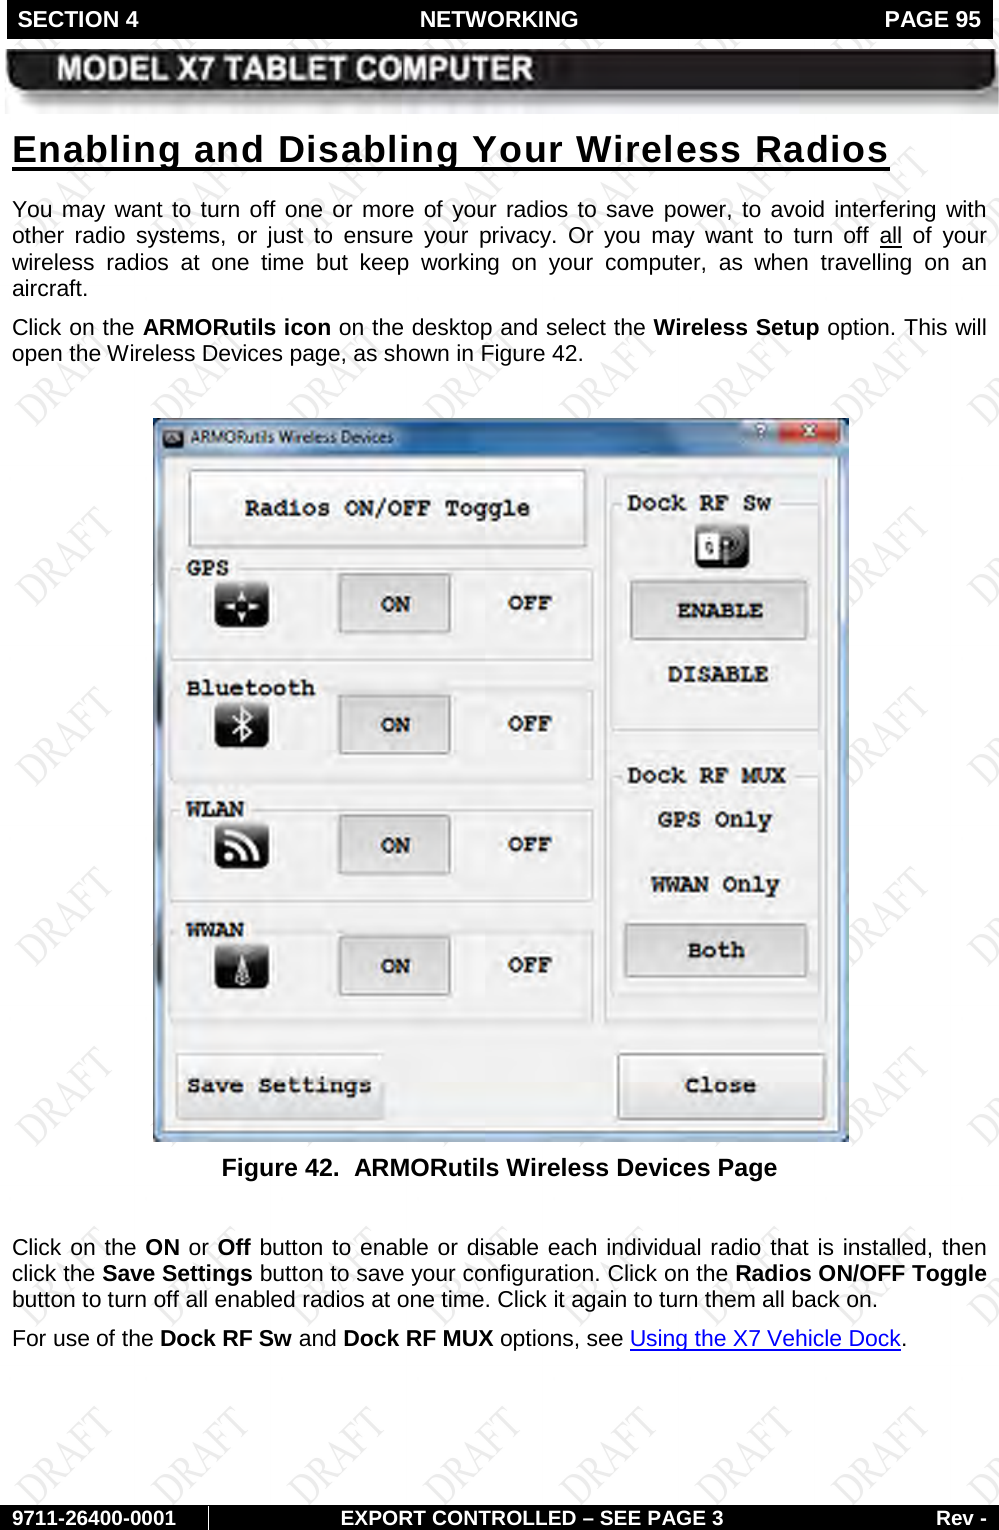 SECTION 4 NETWORKING  PAGE 95        9711-26400-0001 EXPORT CONTROLLED – SEE PAGE 3 Rev - You may want to turn off one or more of your radios to save power, to avoid interfering with other radio systems, or just to ensure your privacy. Or you may want to turn off Enabling and Disabling Your Wireless Radios allClick on the ARMORutils icon on the desktop and select the Wireless Setup option. This will open the Wireless Devices page, as shown in  of your wireless radios at one time but keep working on your computer, as when travelling on an aircraft. Figure 42.   Figure 42.  ARMORutils Wireless Devices Page  Click on the ON or Off button to enable or disable each individual radio that is installed, then click the Save Settings button to save your configuration. Click on the Radios ON/OFF Toggle button to turn off all enabled radios at one time. Click it again to turn them all back on. For use of the Dock RF Sw and Dock RF MUX options, see Using the X7 Vehicle Dock.   